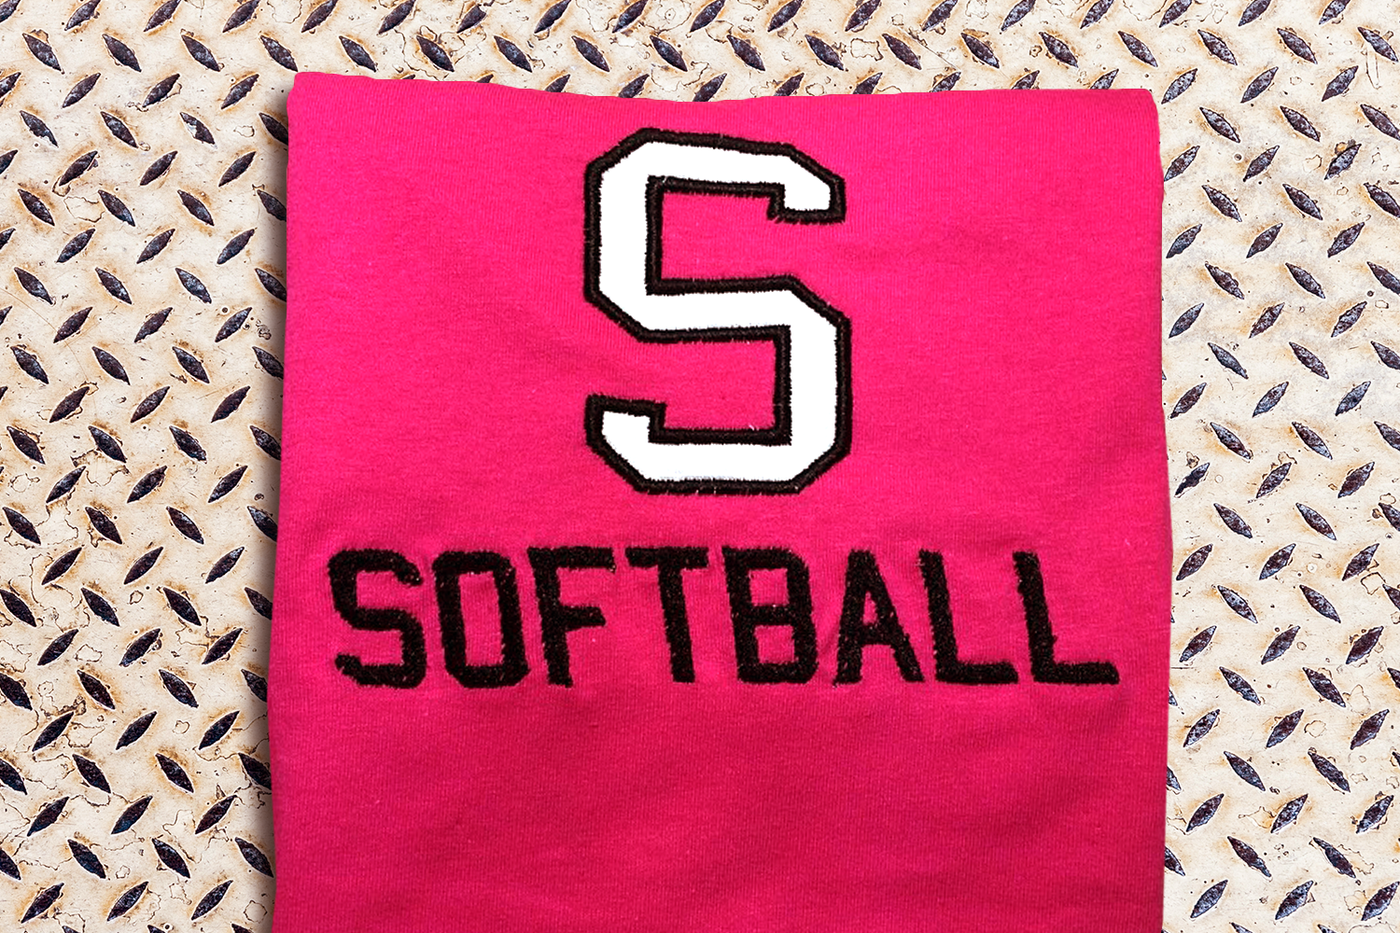 Applique S with the embroidered word "Softball" below